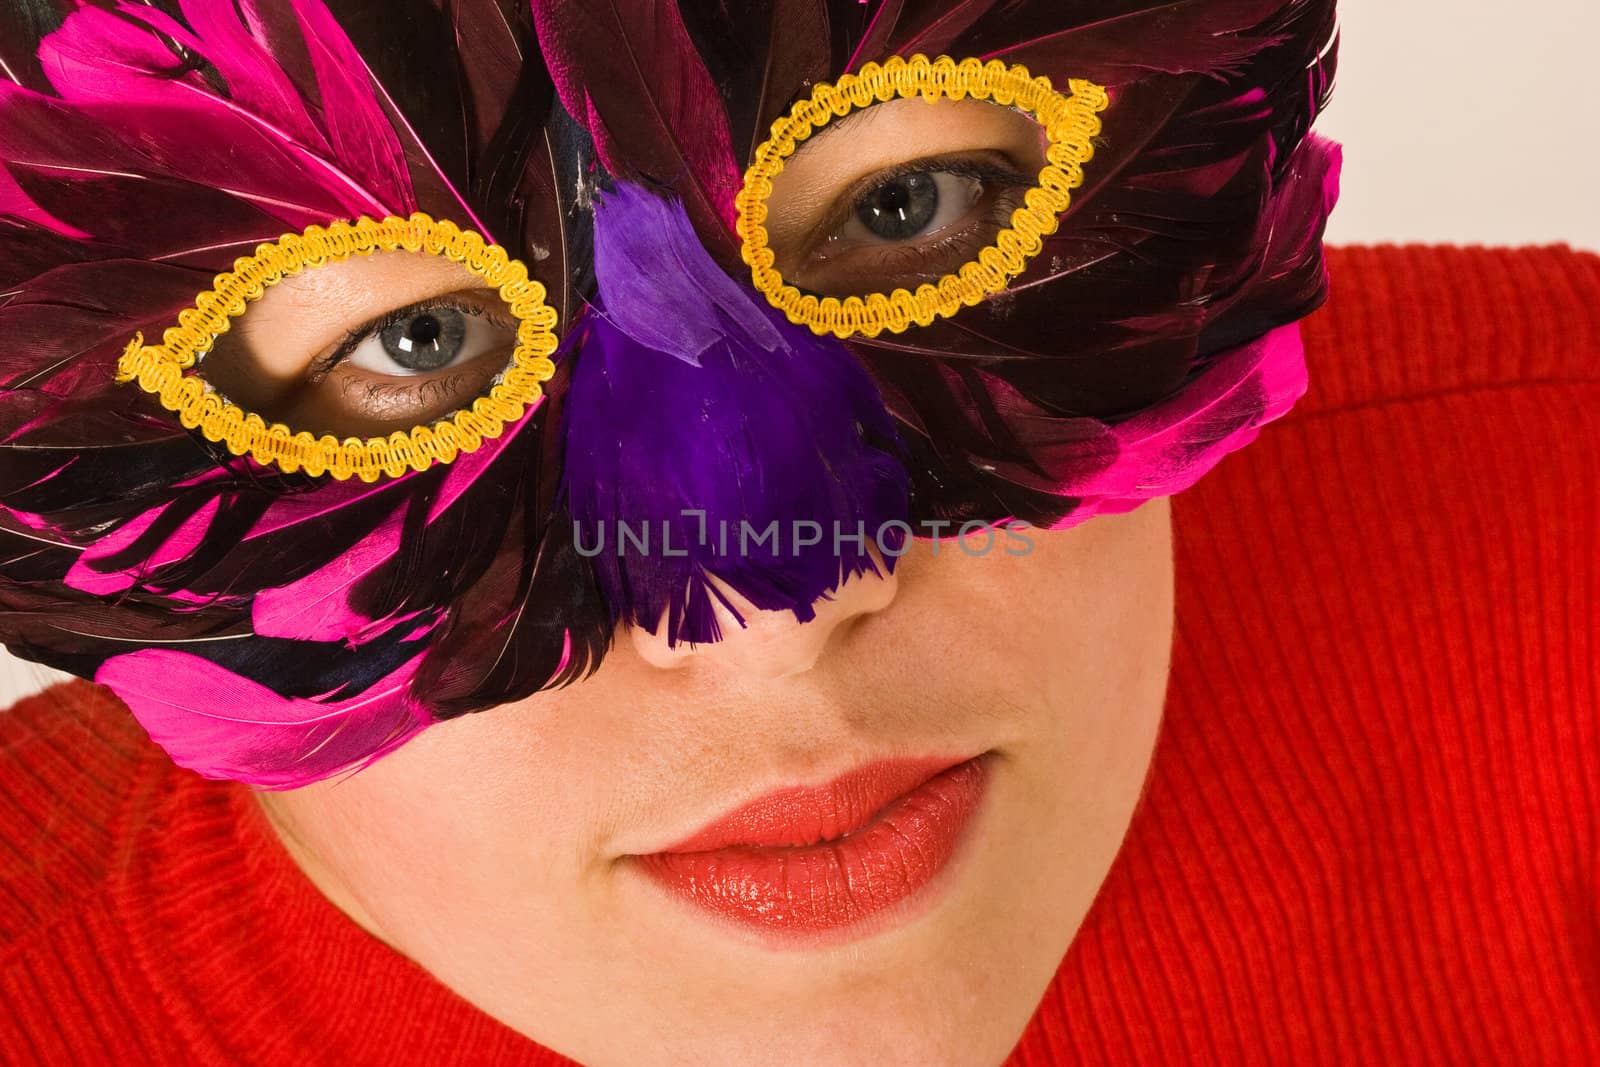 portret of lady ih red with mask, carnival